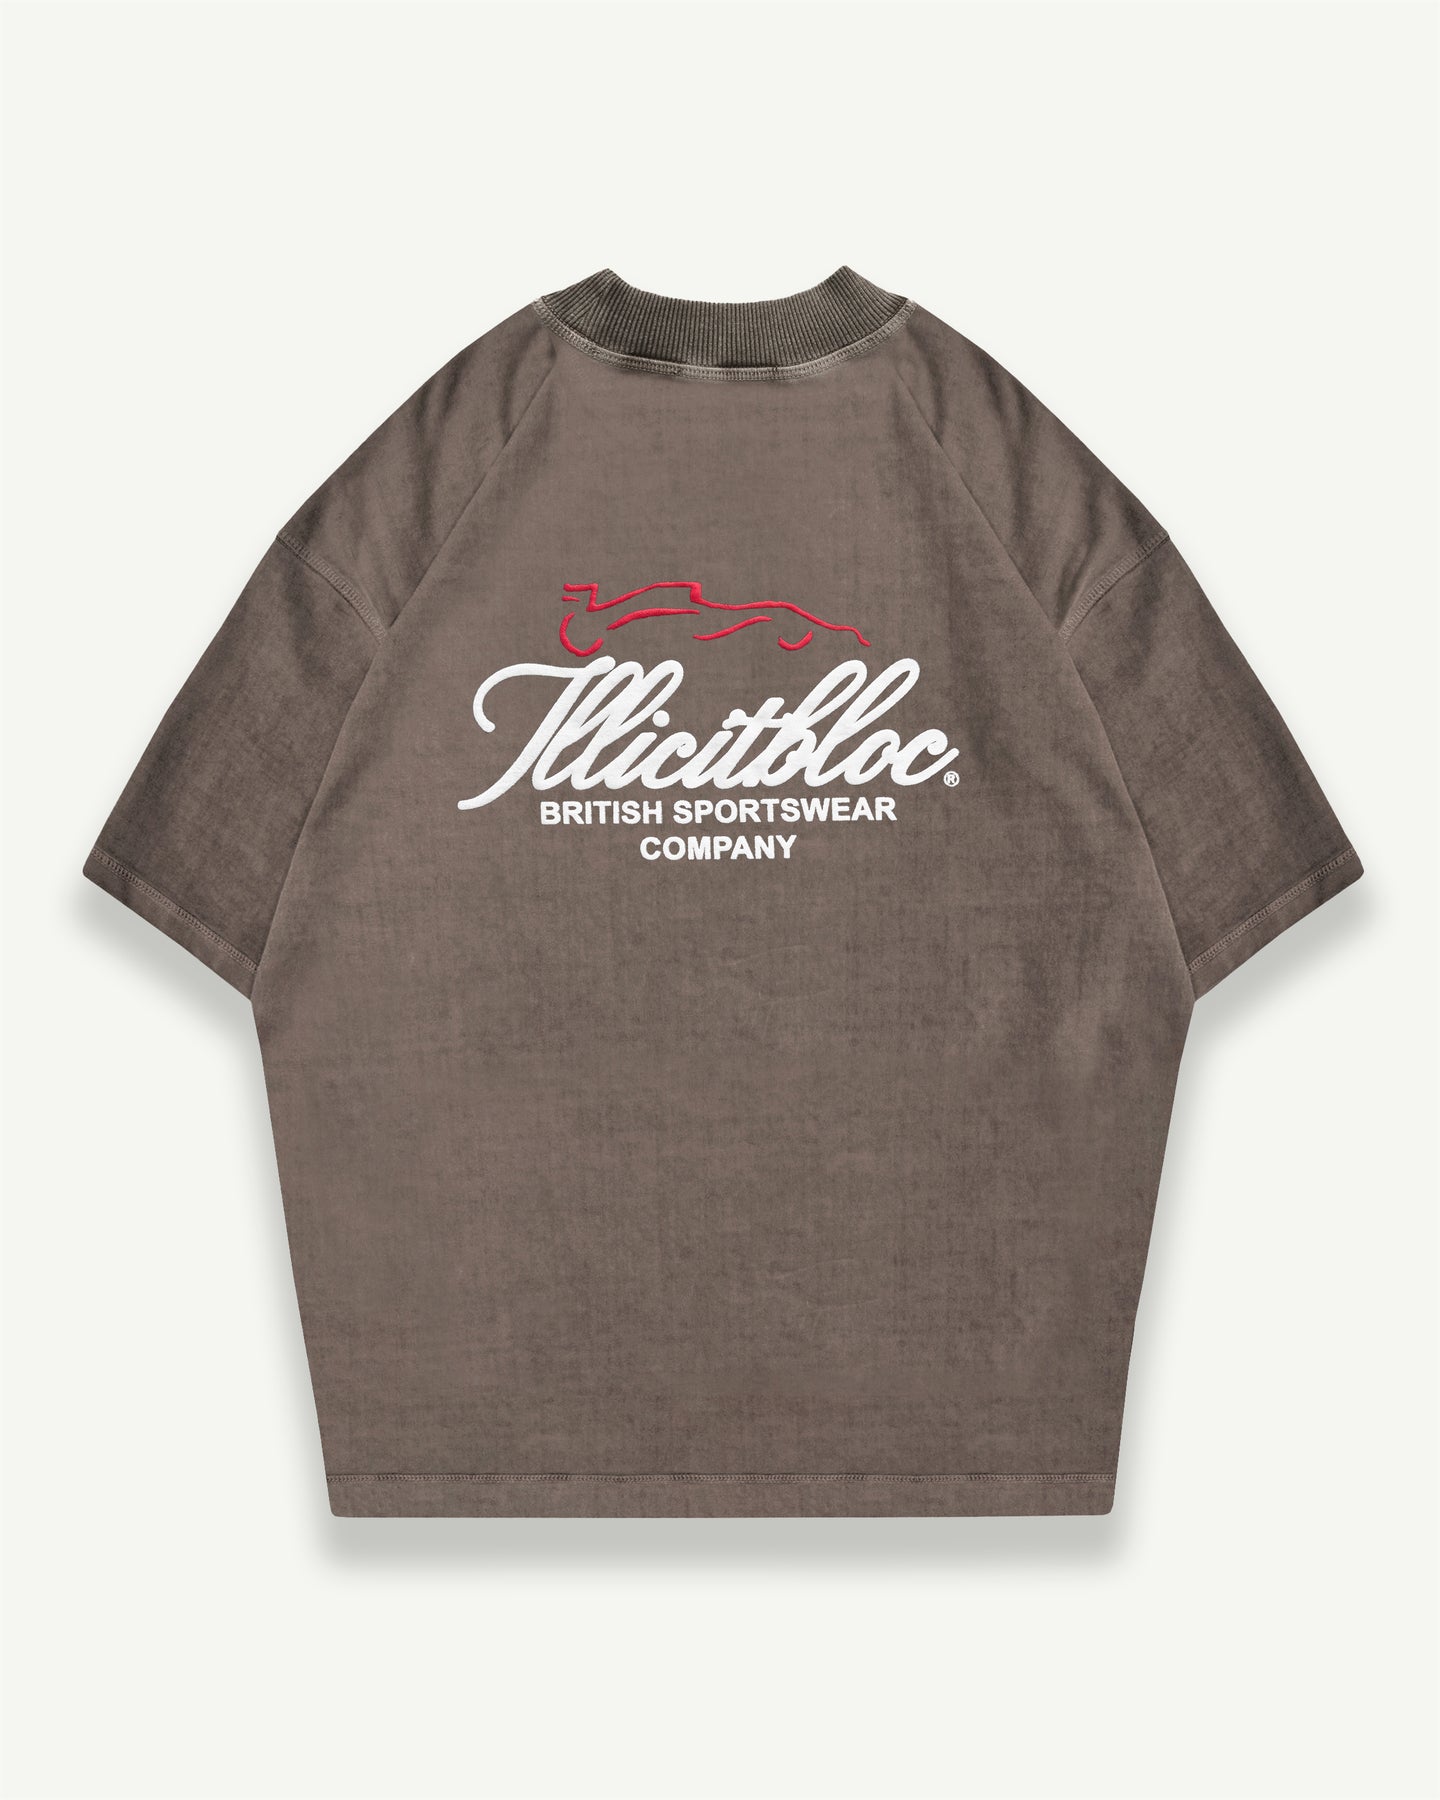 SILHOUETTE T-SHIRT - WASHED BROWN